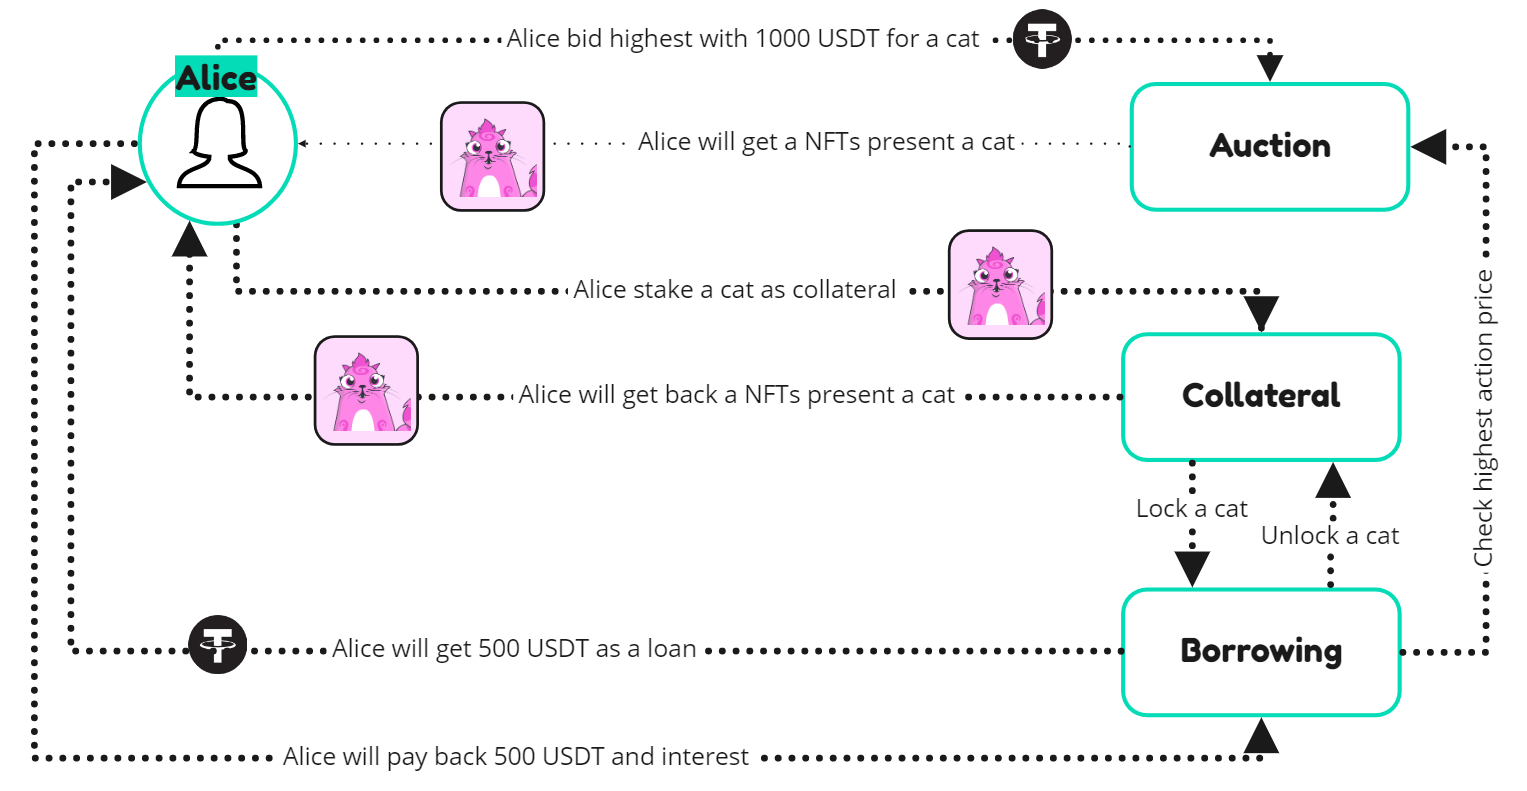 (Use case with using NFTs as collateral to borrow money)